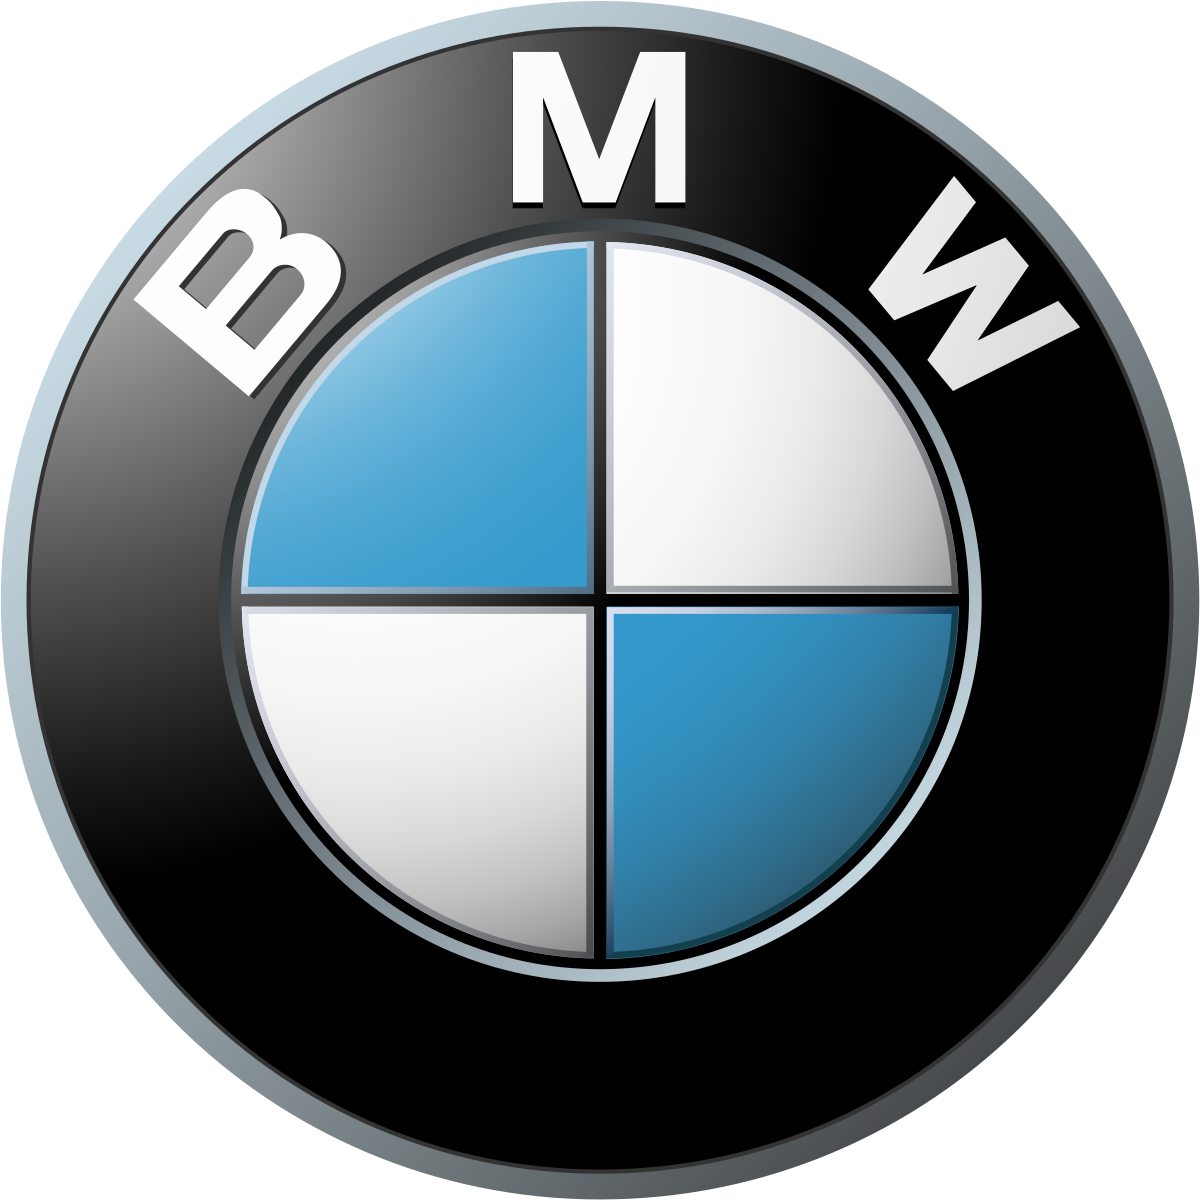 BMW emissions challenge unfounded, court rules, NGO to appeal